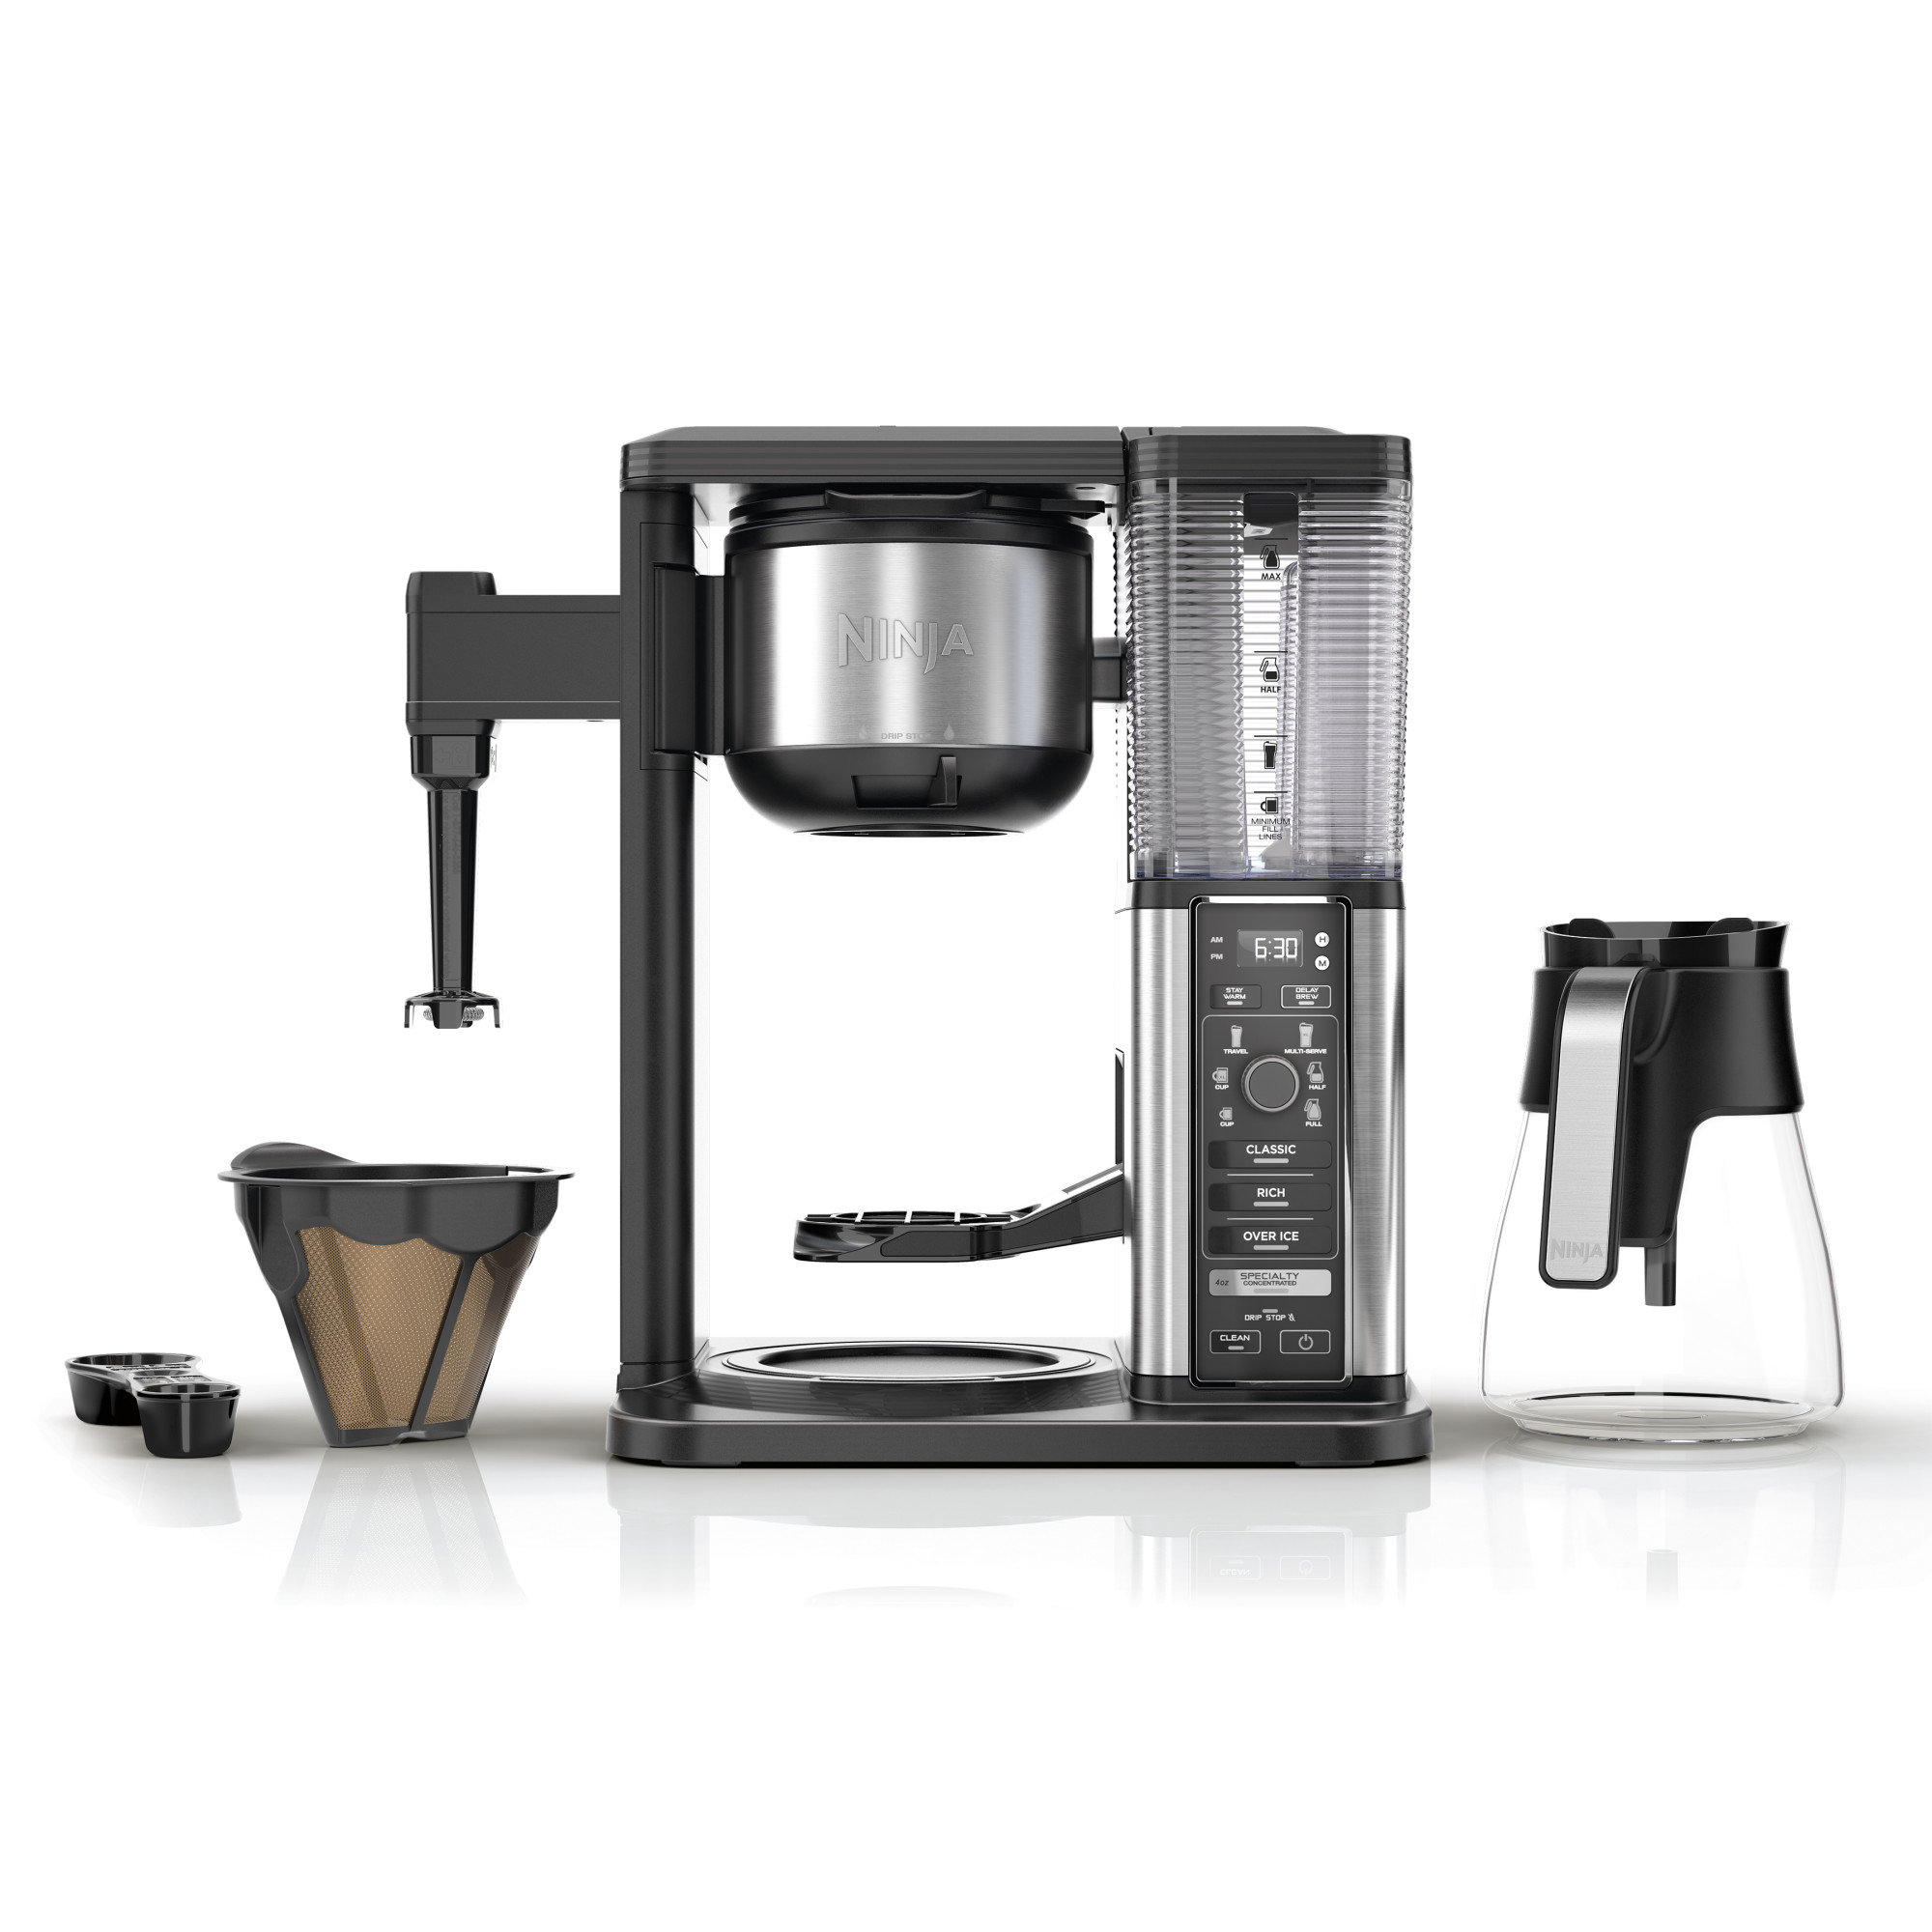 Ninja Hot and Iced Coffee Maker - appliances - by owner - sale